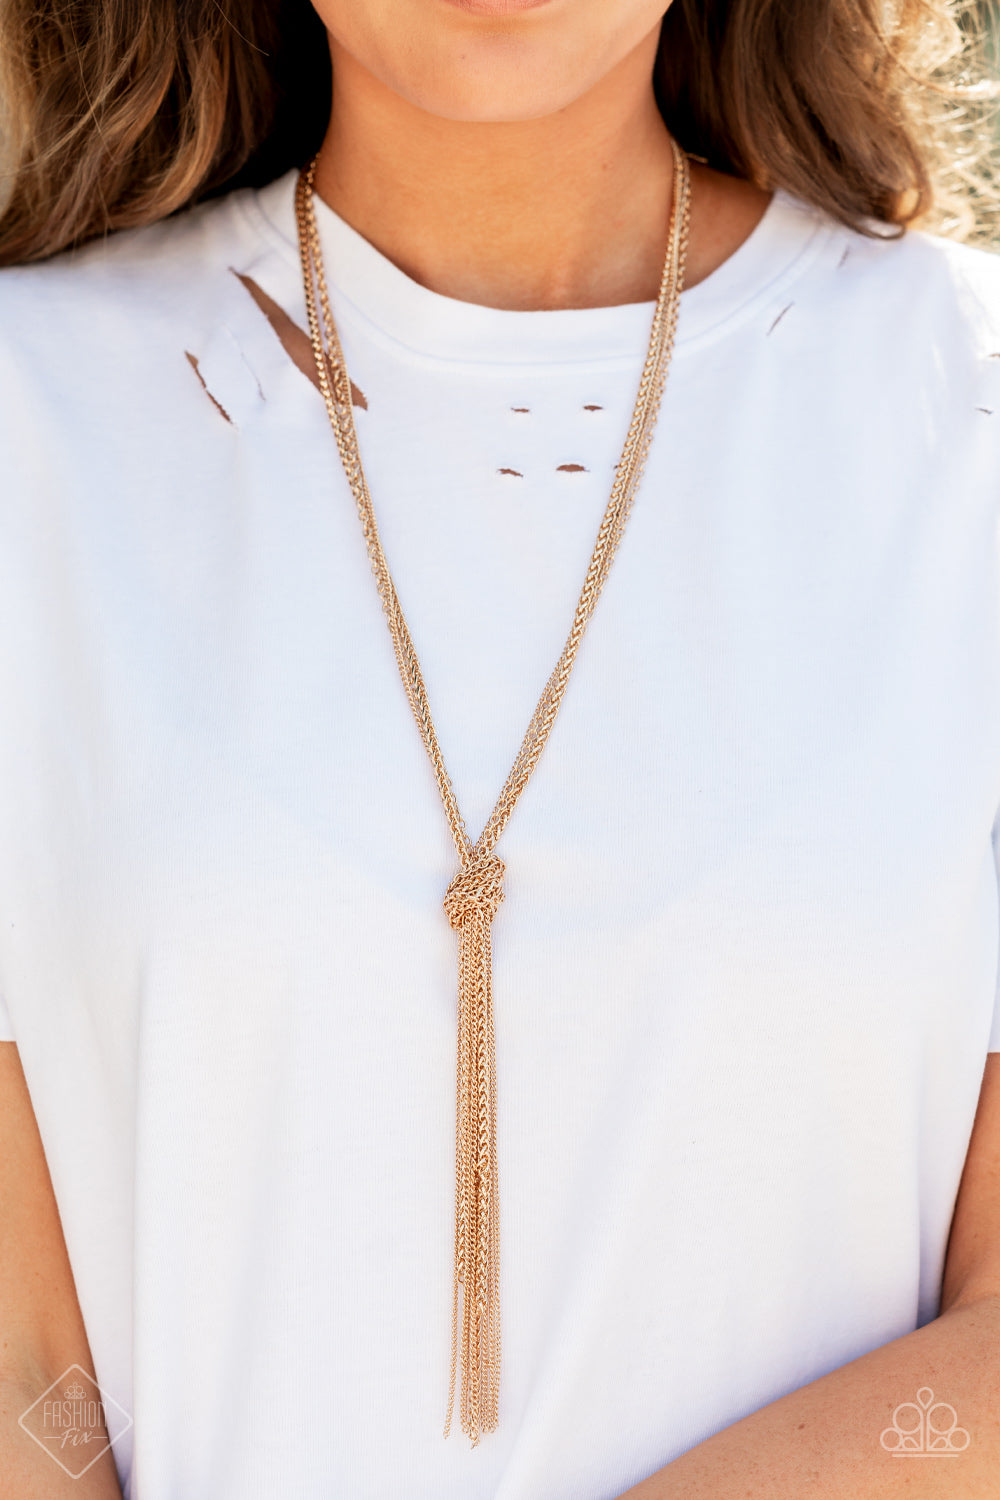 Paparazzi KNOT All There.- Gold Necklace - Fashion Fix - October 2021